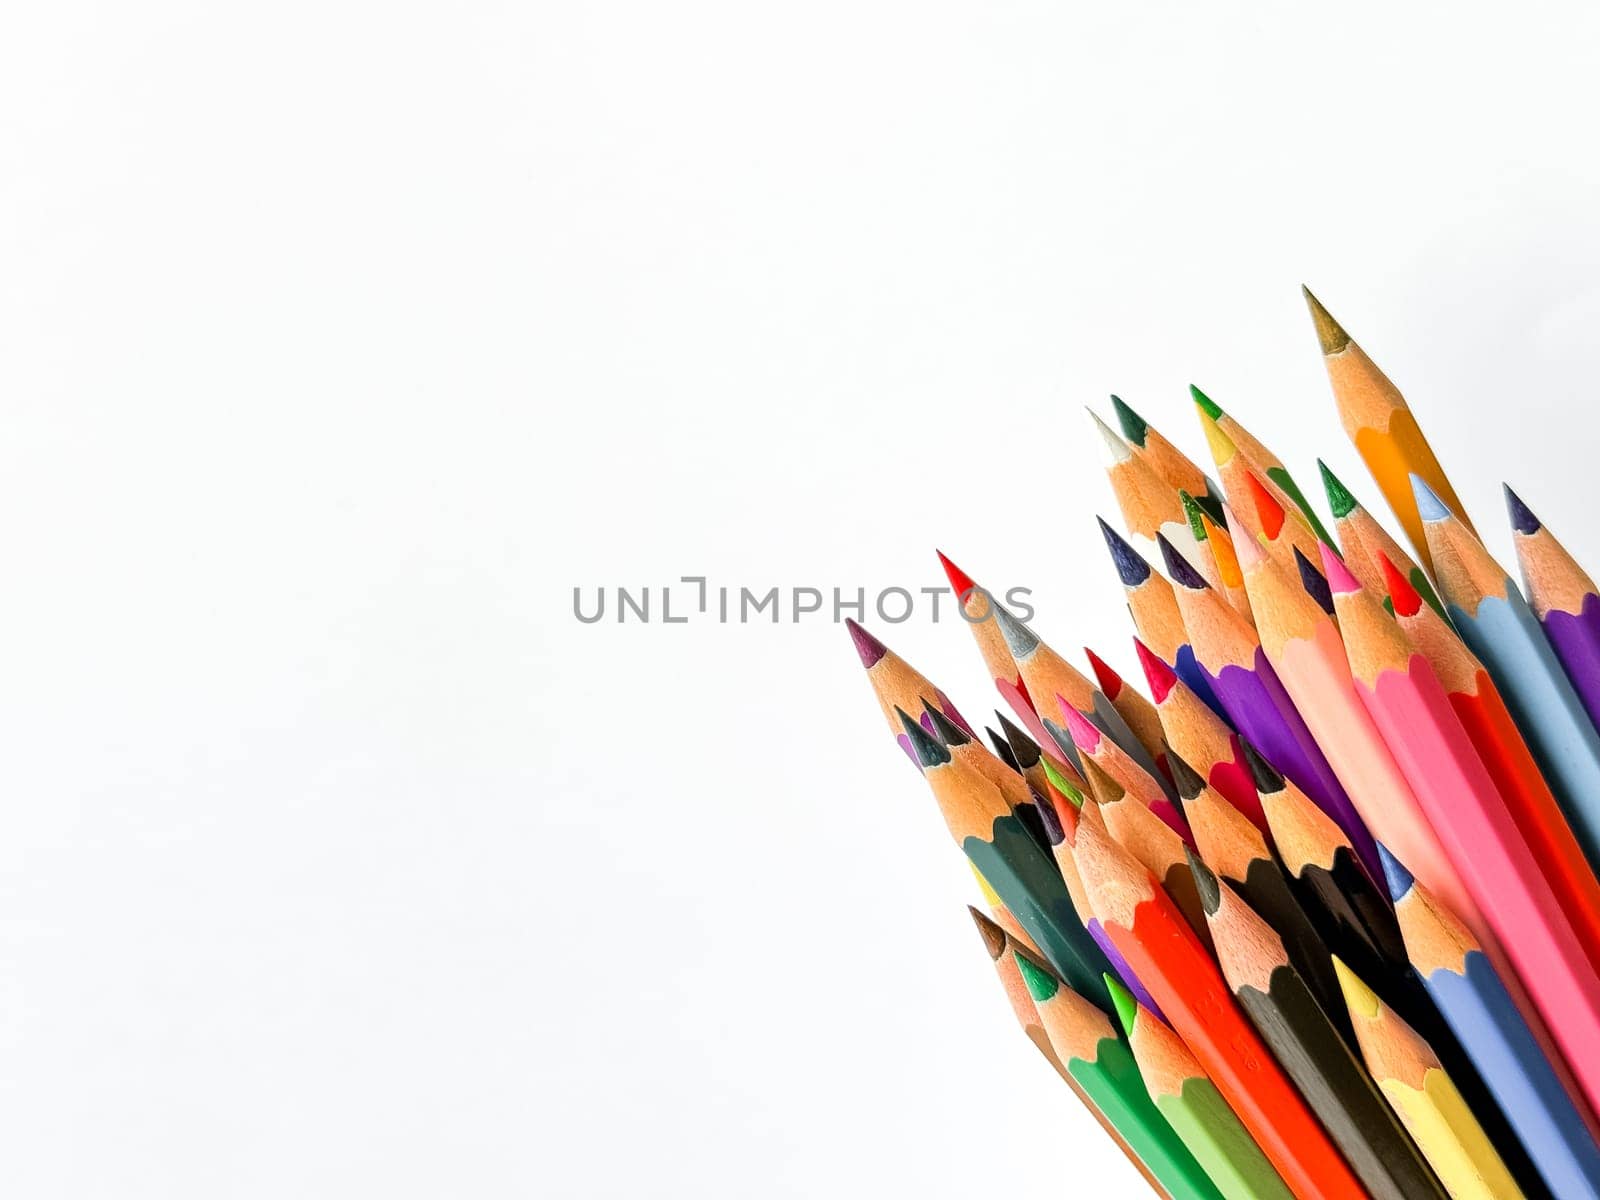 Assorted sharpened colorful pencils pointing up on white background with copy space for text. Concept of artistic or school supplies for design, teaching and educational purposes. High quality photo